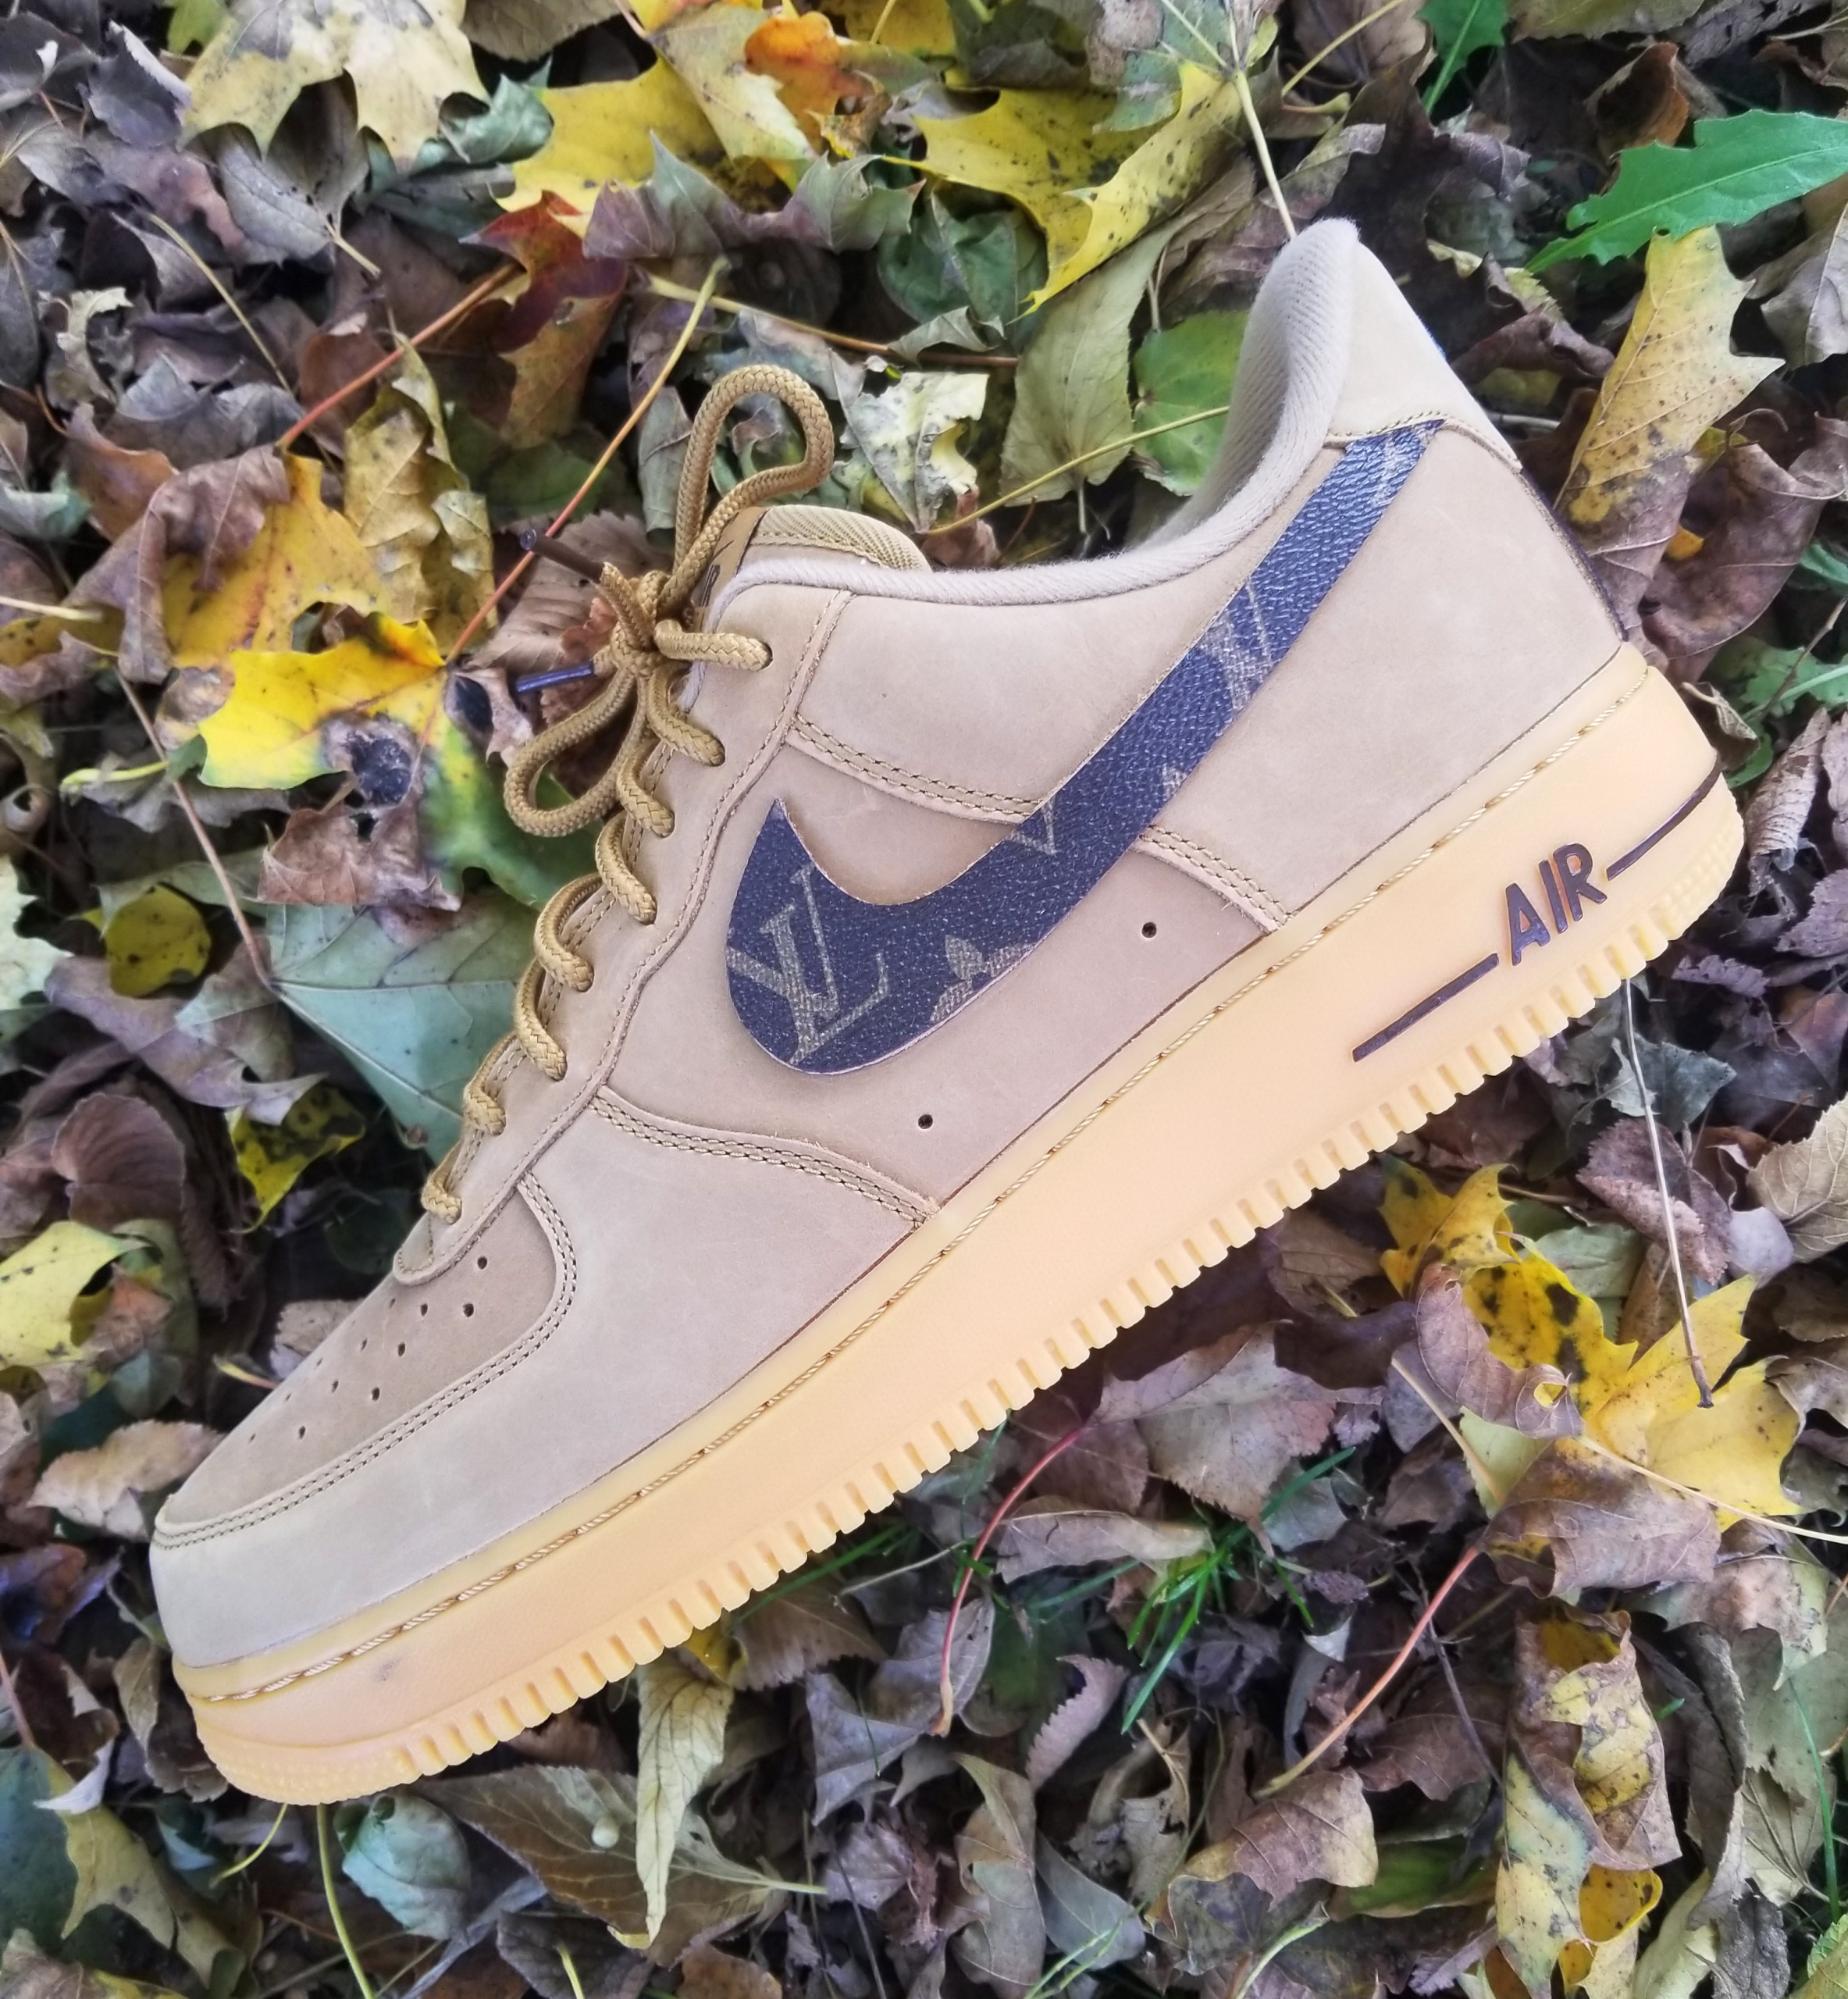 nike wheat forces